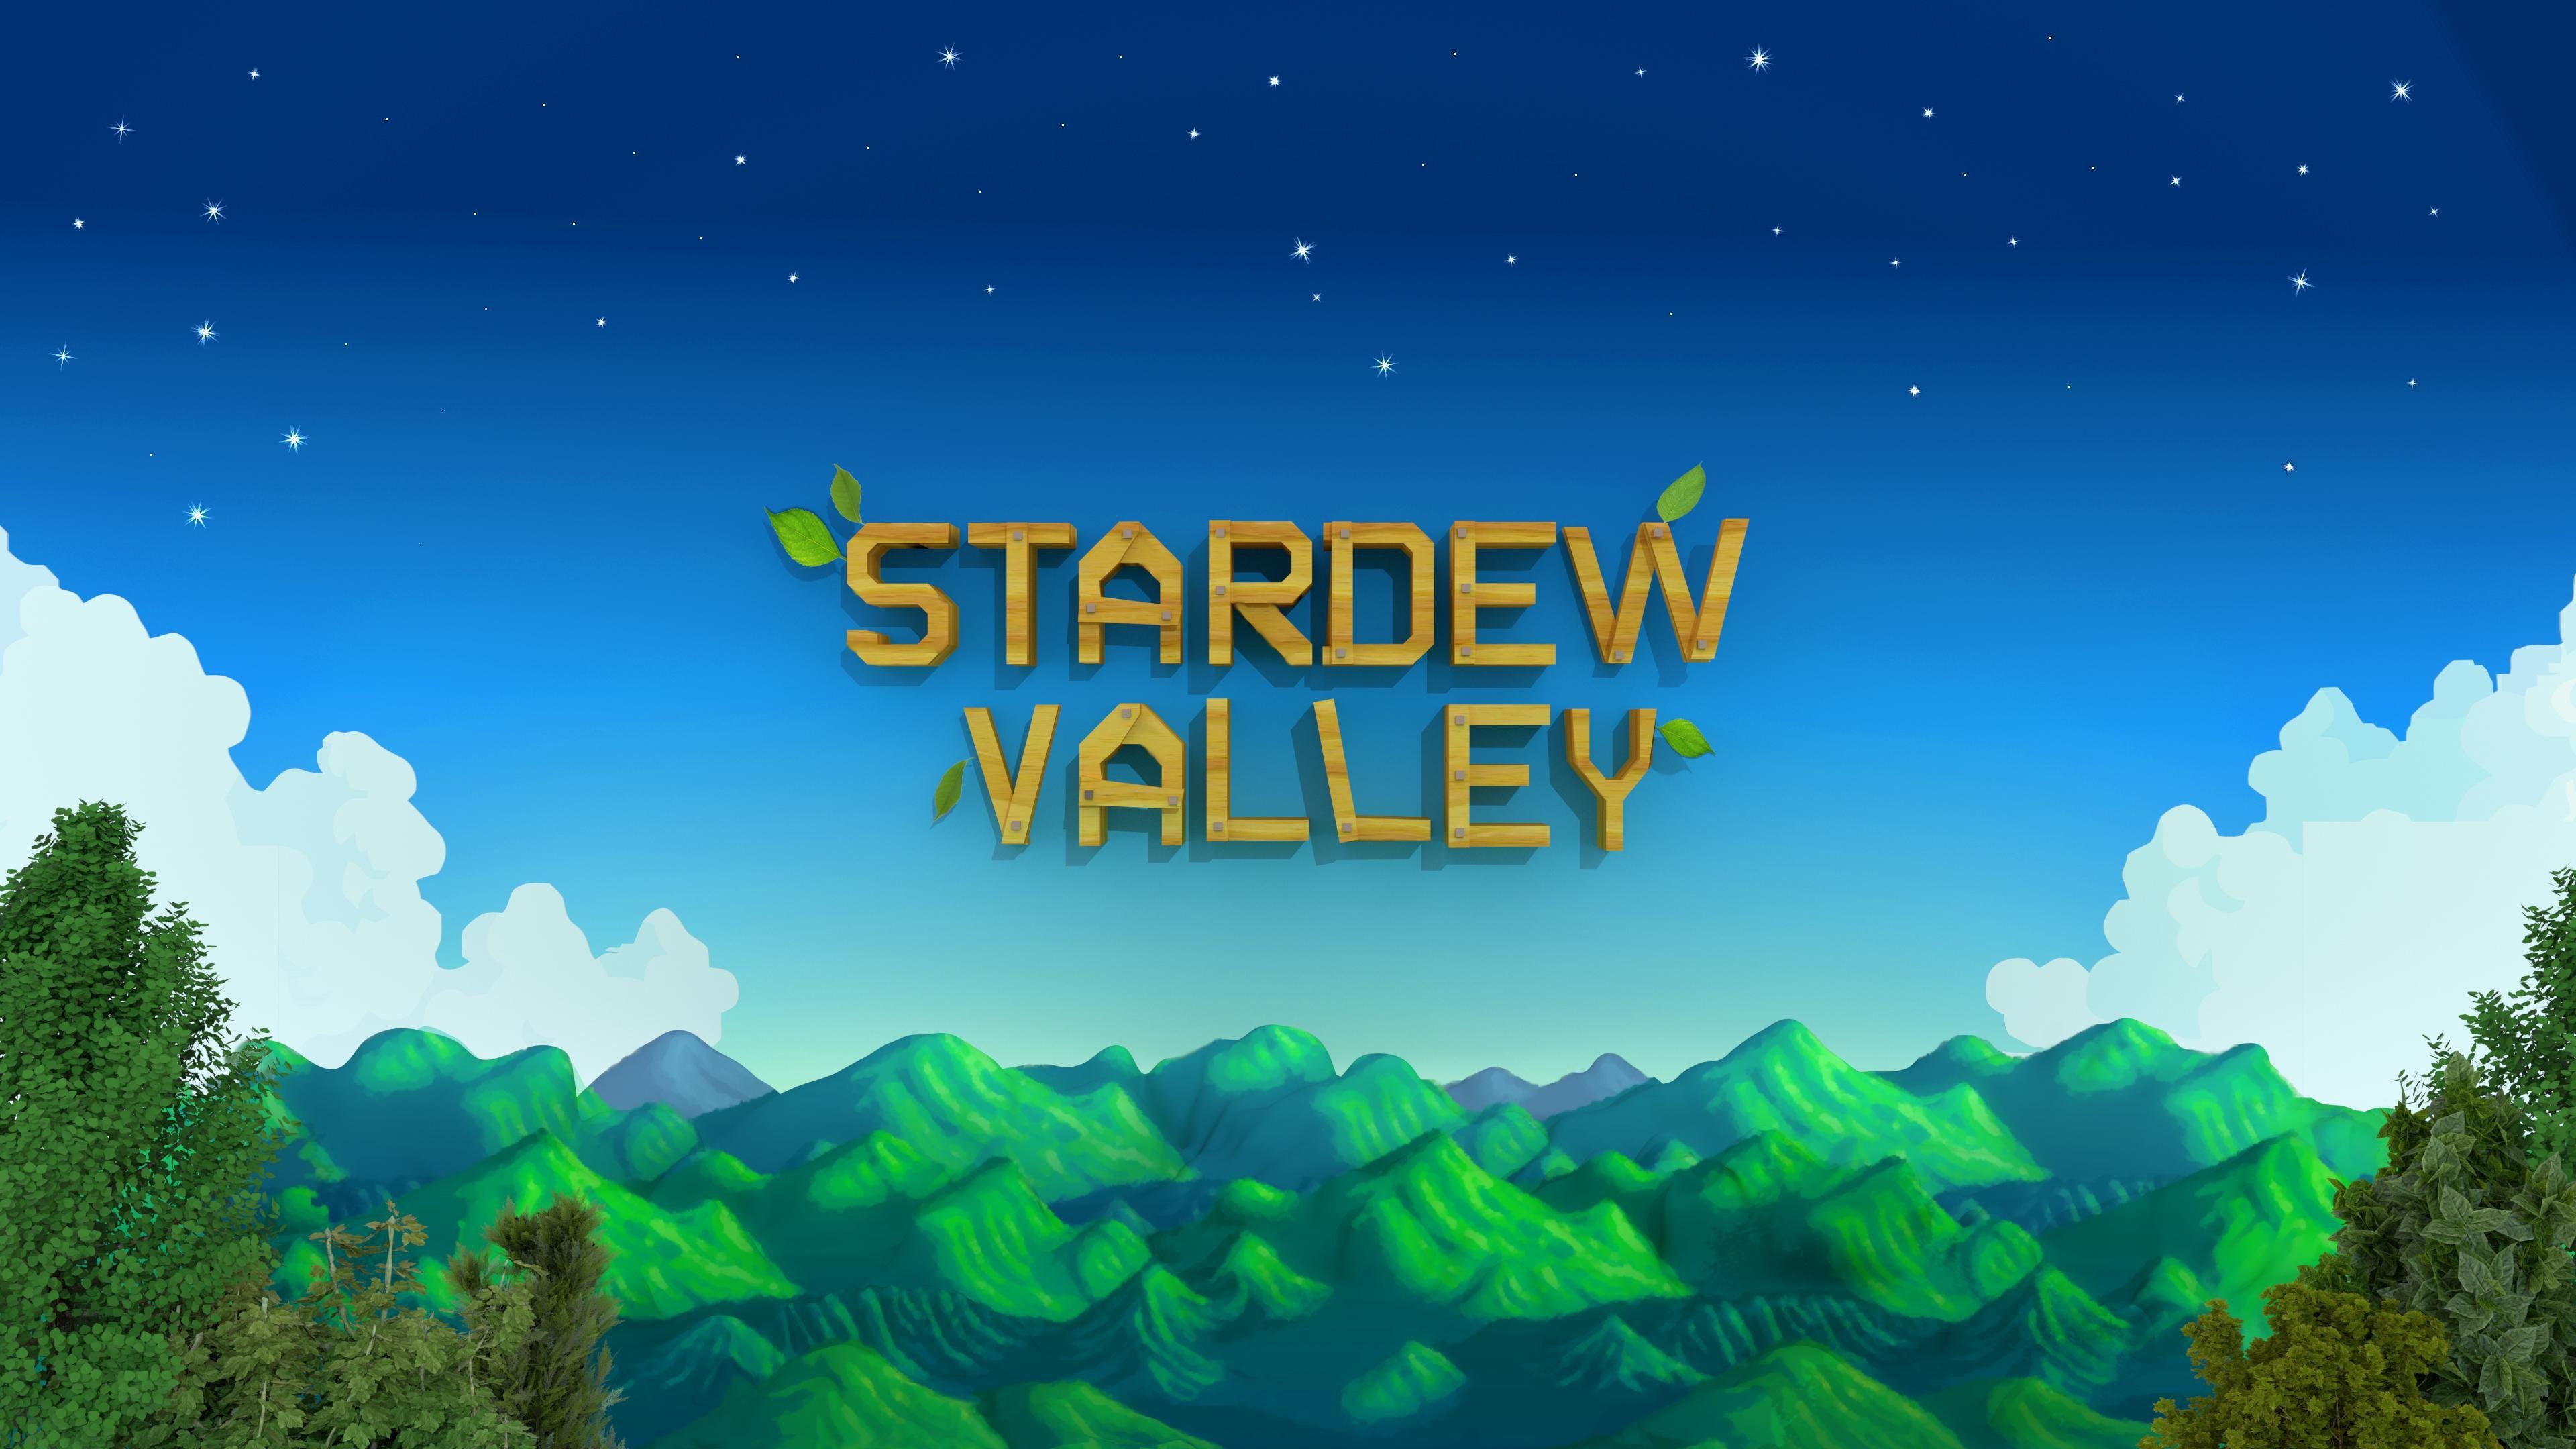 Tons of awesome Stardew Valley desktop wallpapers to download for free. 